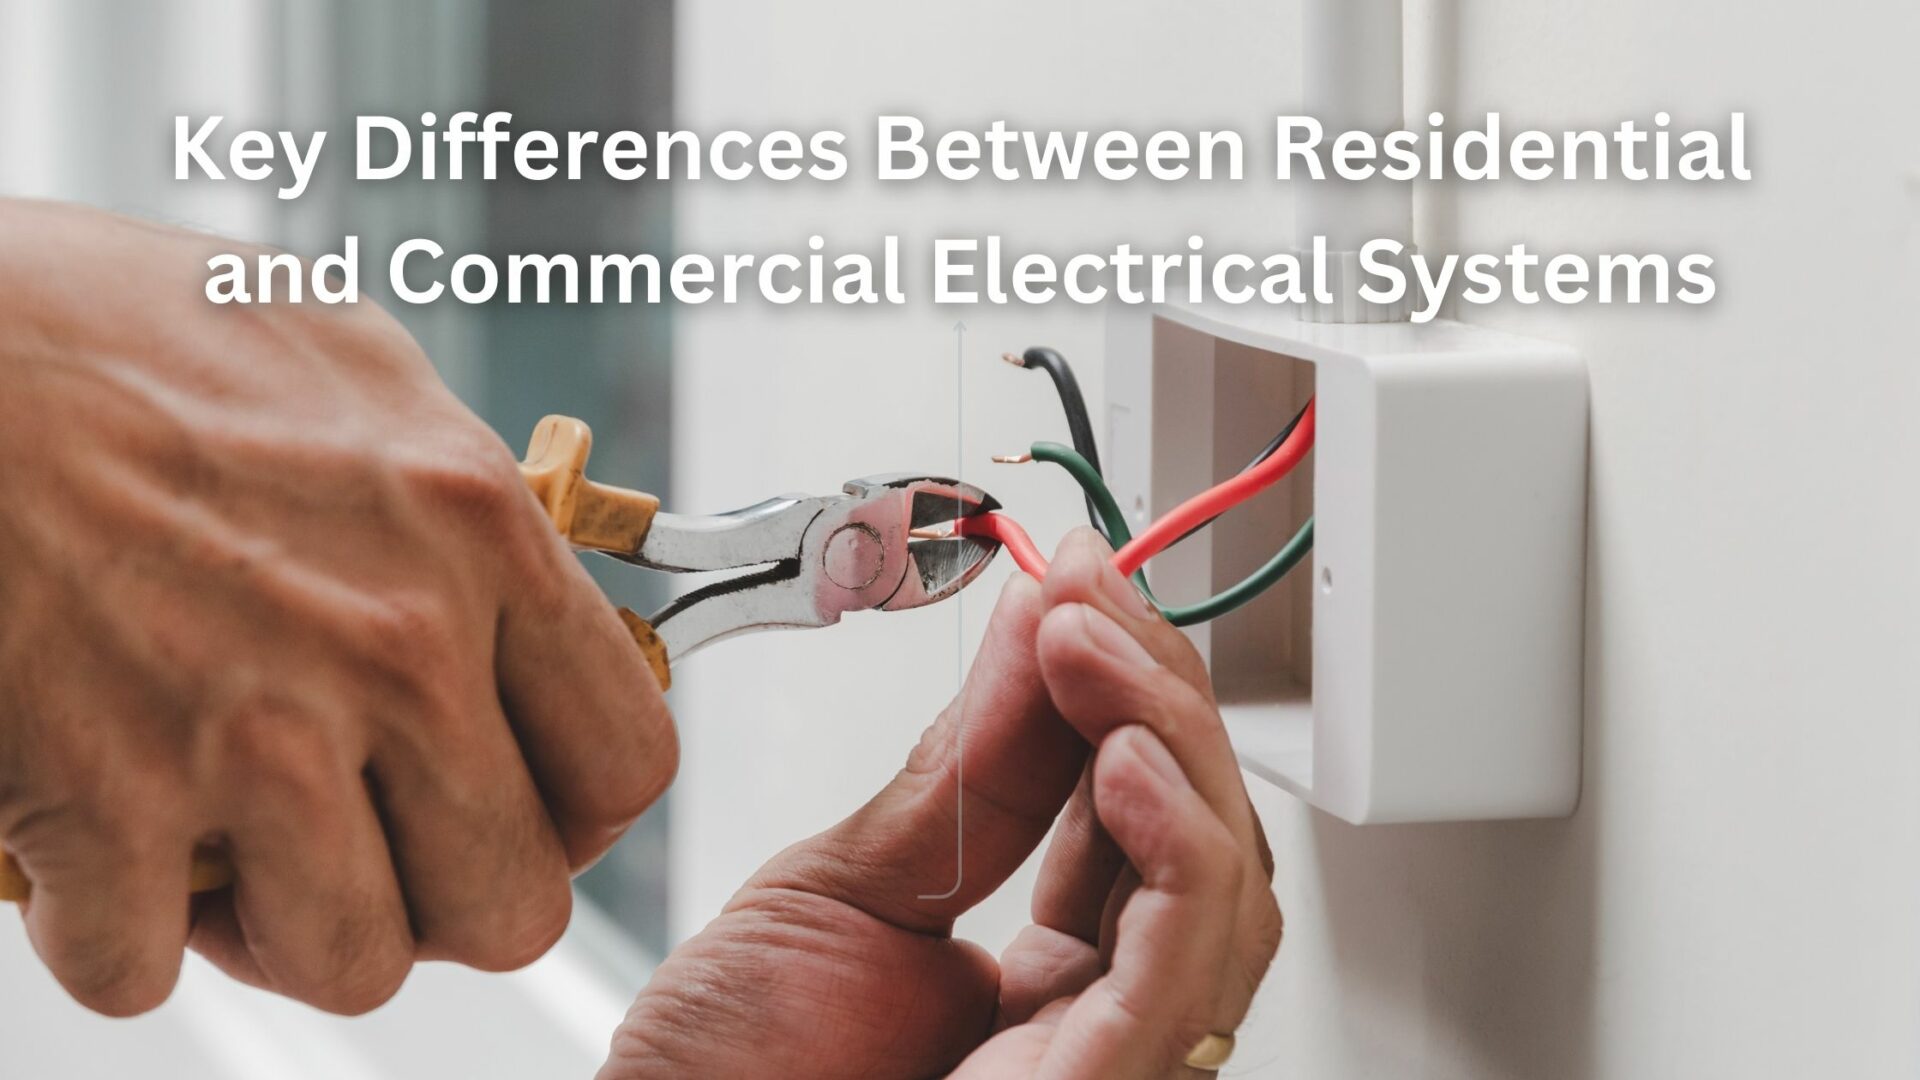 Key Differences Between Residential and Commercial Electrical Systems